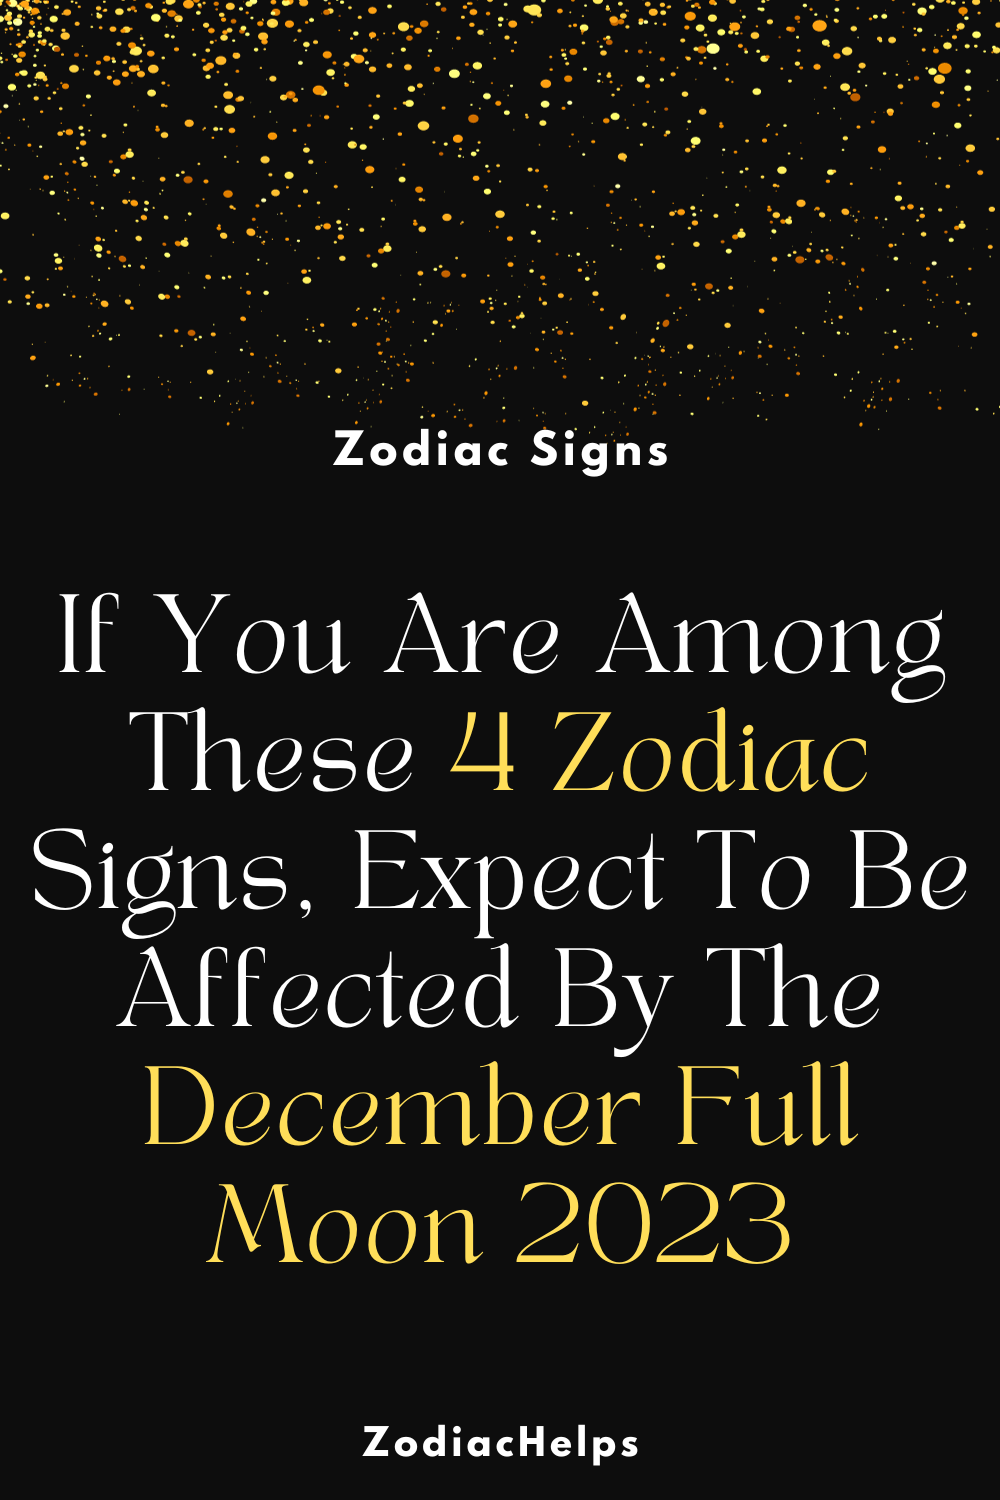 If You Are Among These 4 Zodiac Signs, Expect To Be Affected By The December Full Moon 2023